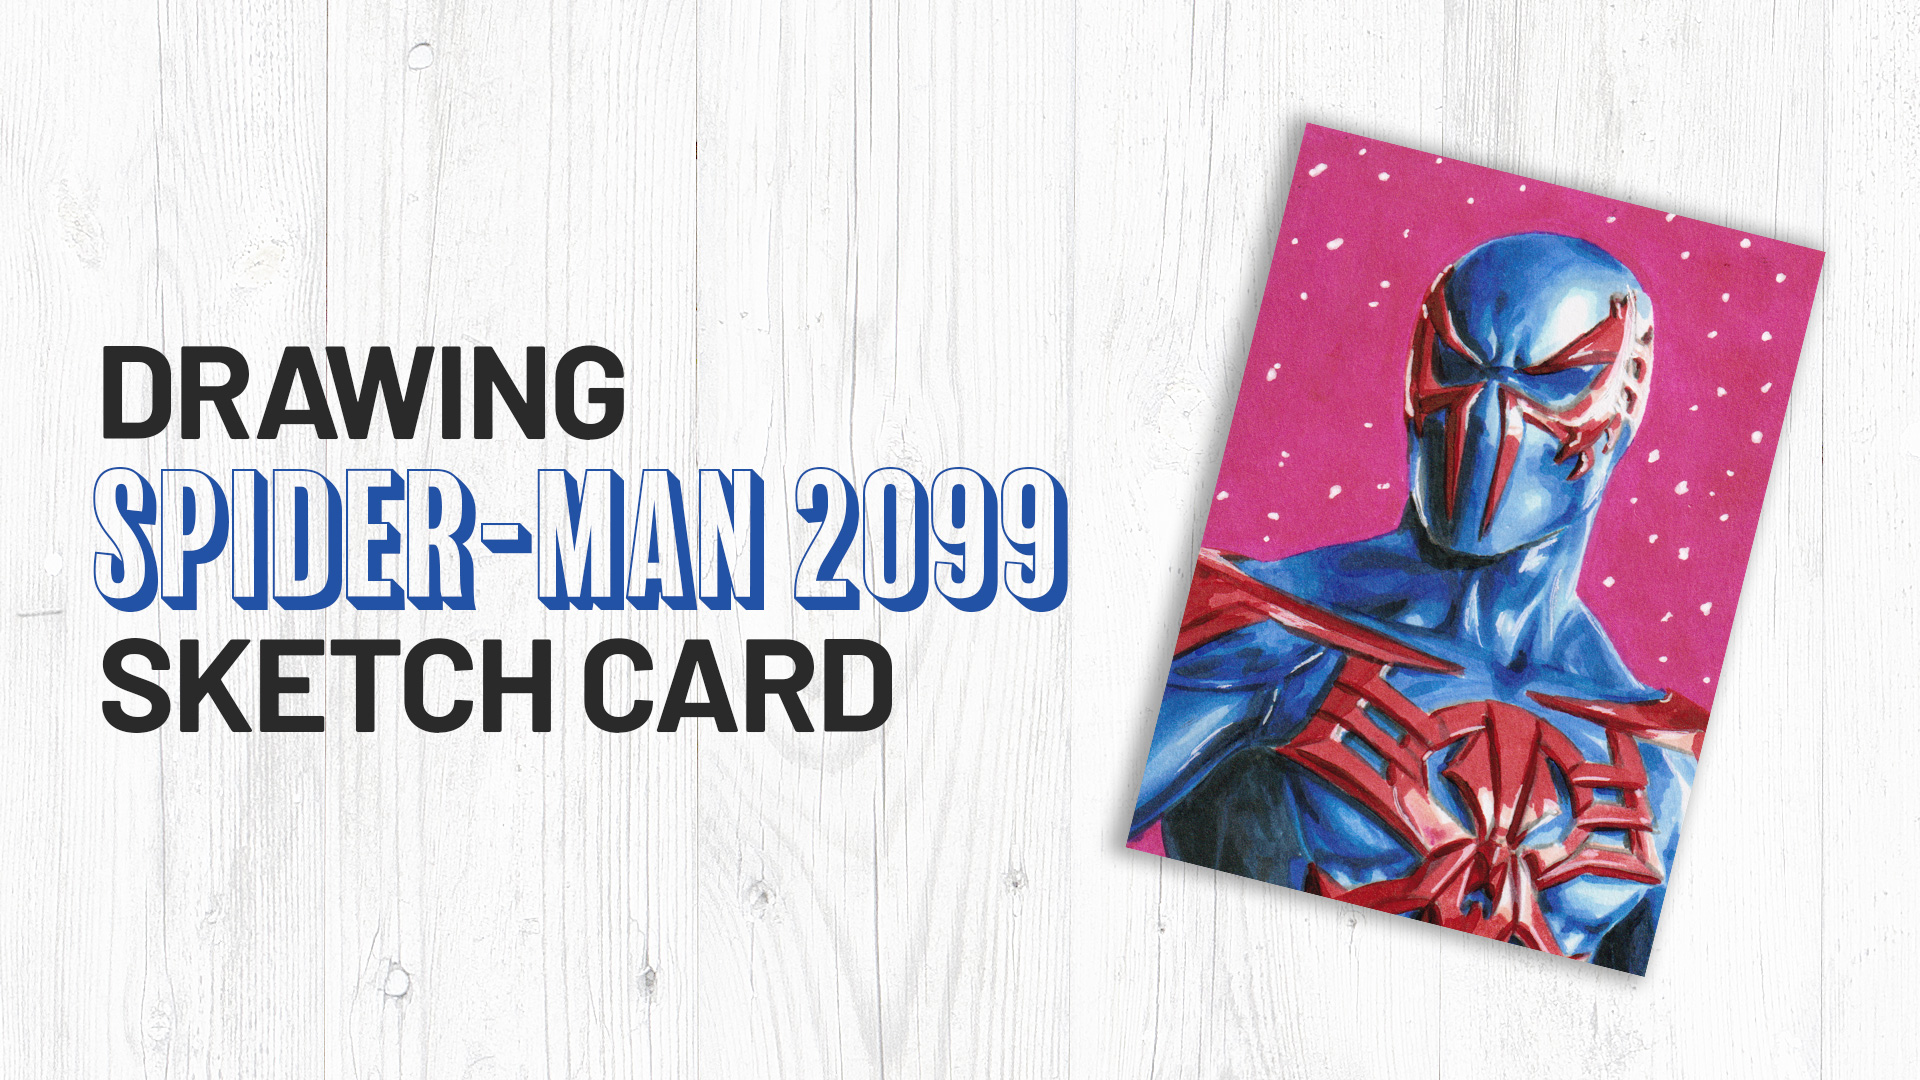 Drawing Spider-Man 2099 Sketch Card by Duke